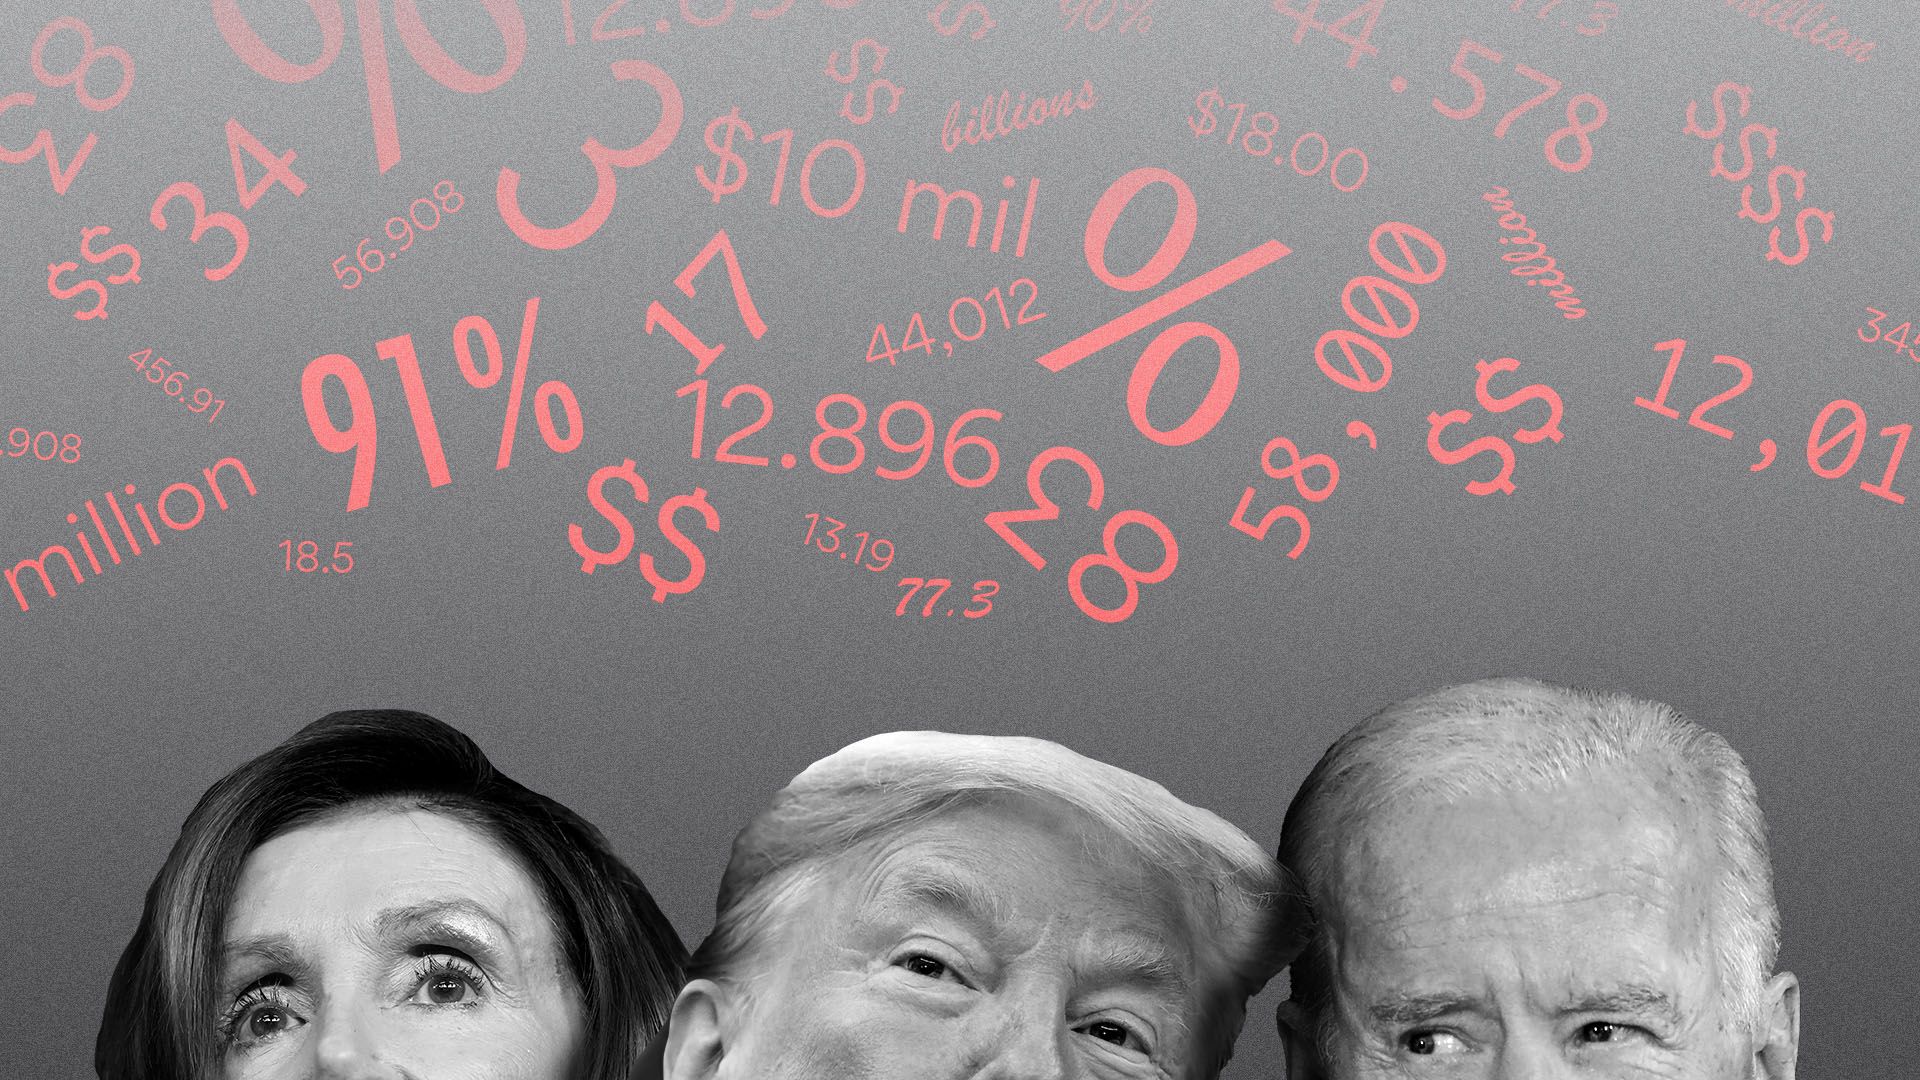 Photo illustration of Nancy Pelosi, Donald Trump, and Joe Biden, with numbers floating above their heads